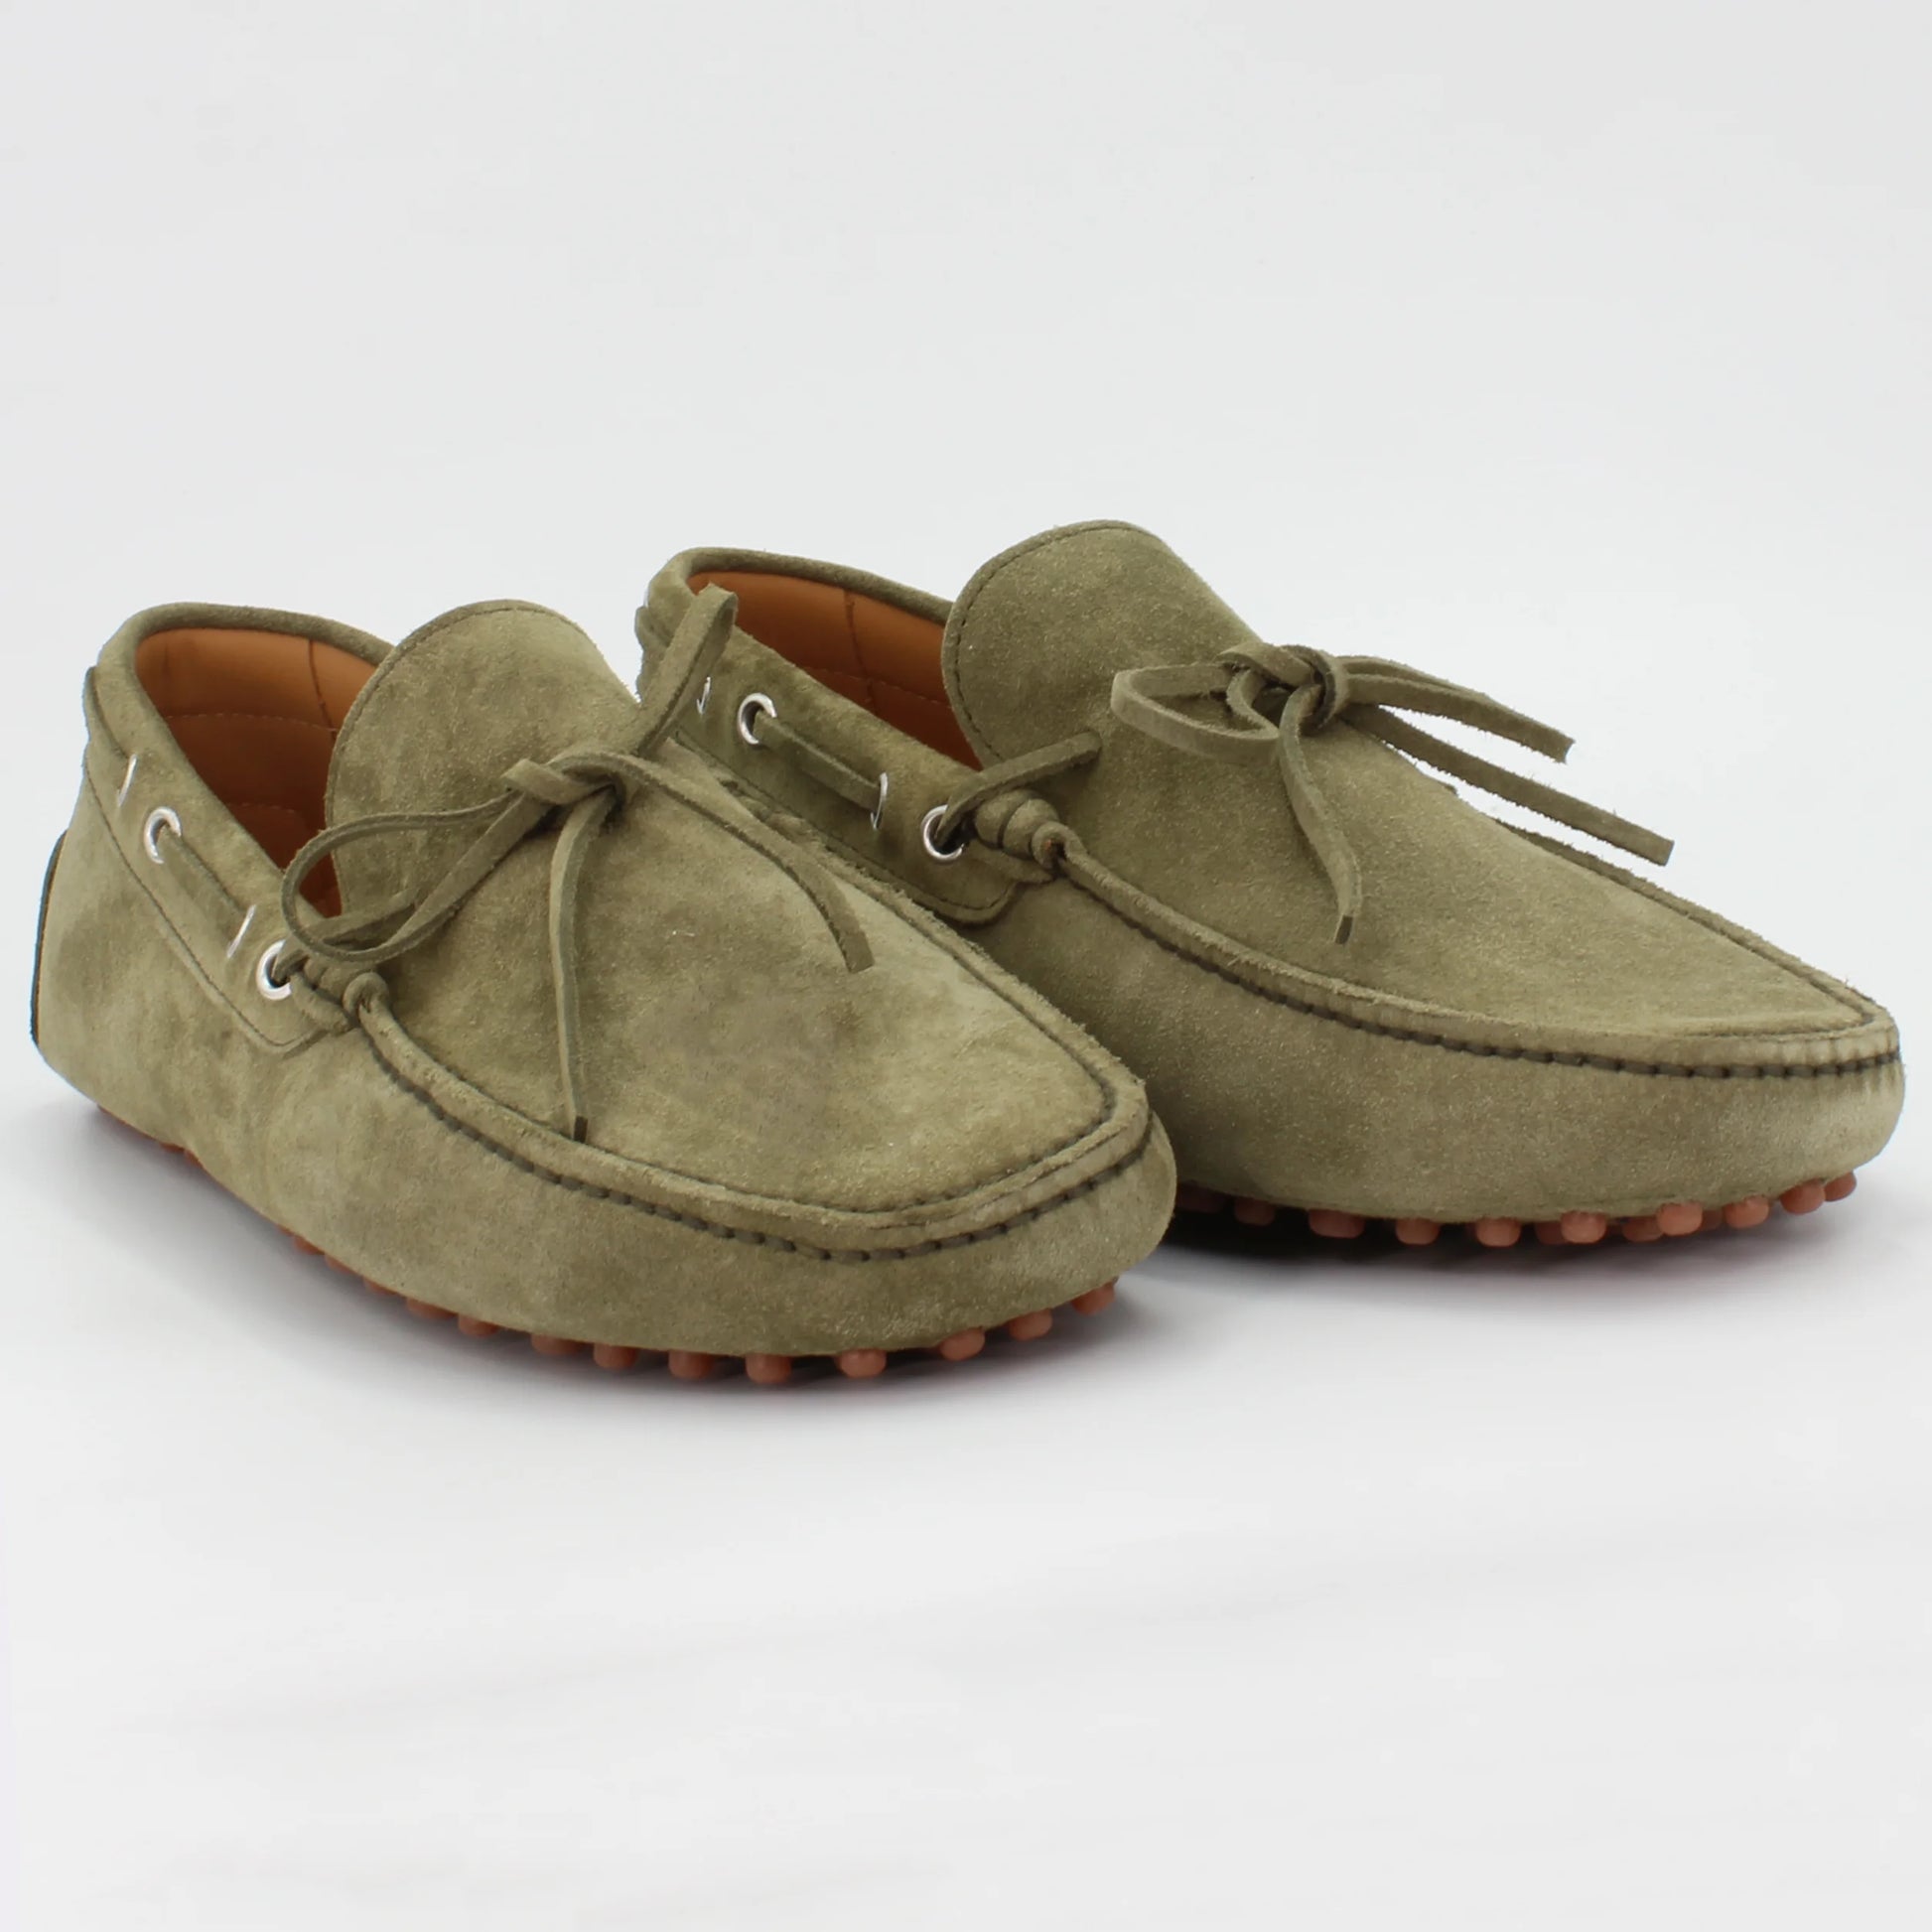 Shop Handmade Italian Leather suede moccasin in asparago velour (UO460003) or browse our range of hand-made Italian shoes for men in leather or suede in-store at Aliverti Cape Town, or shop online. We deliver in South Africa & offer multiple payment plans as well as accept multiple safe & secure payment methods.